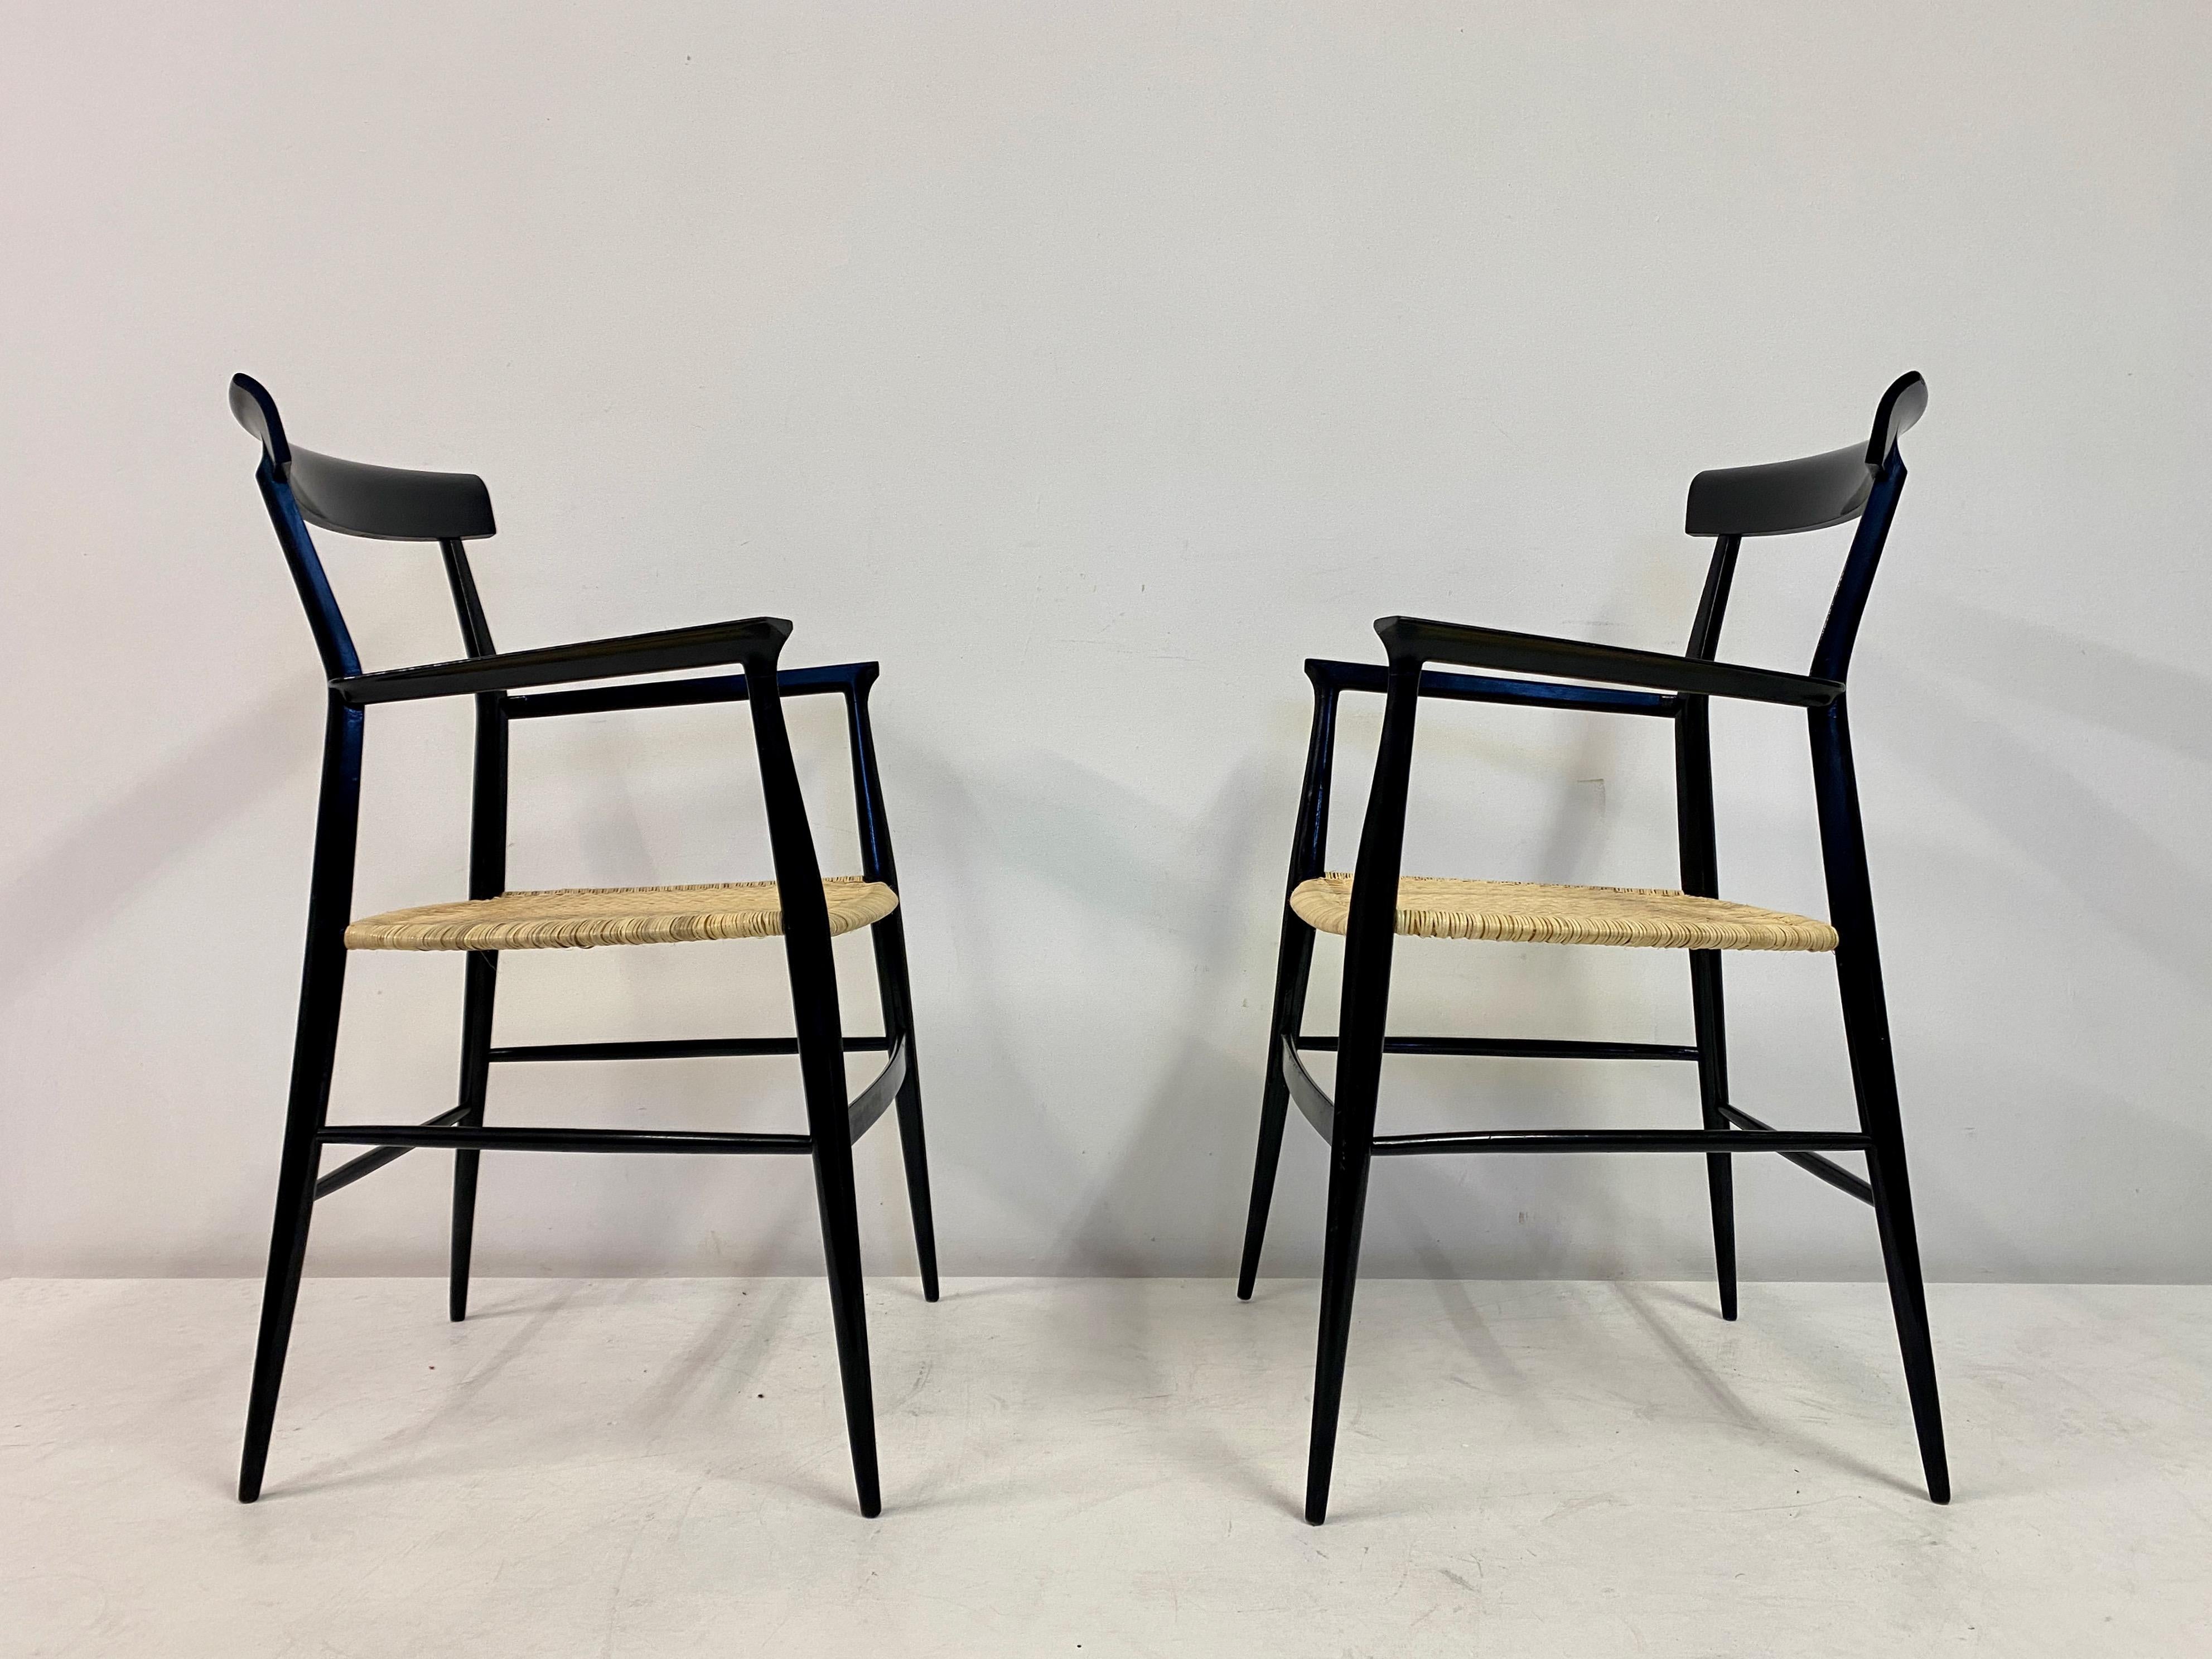 Pair of 1950s Tigullina Chairs by Colombo Sanguineti For Sale 3